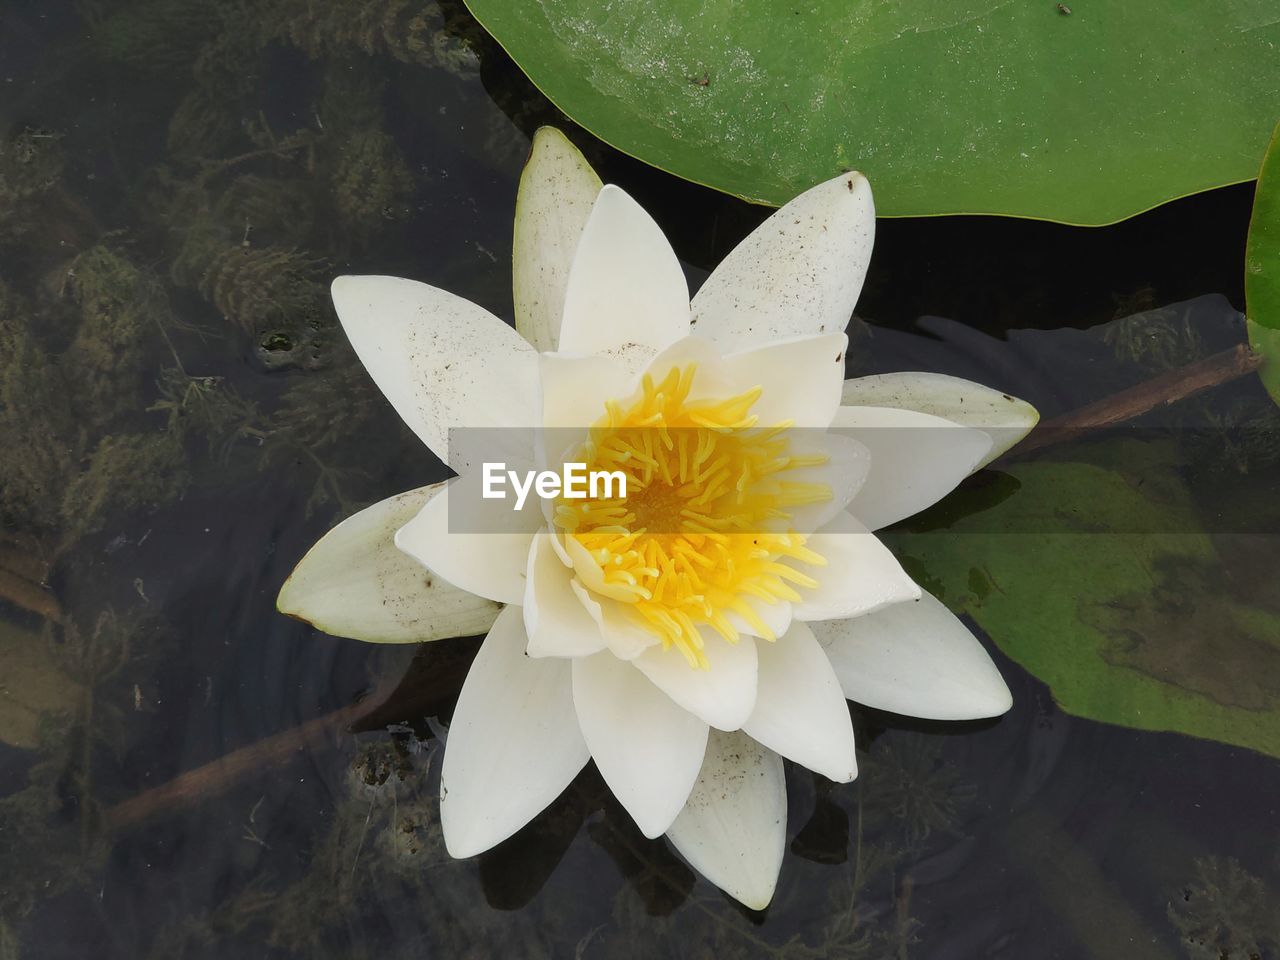 flower, flowering plant, water lily, yellow, water, beauty in nature, plant, pond, aquatic plant, freshness, flower head, nature, petal, inflorescence, leaf, floating on water, floating, fragility, plant part, green, close-up, lotus water lily, lily, high angle view, pollen, white, growth, no people, macro photography, outdoors, directly above, day